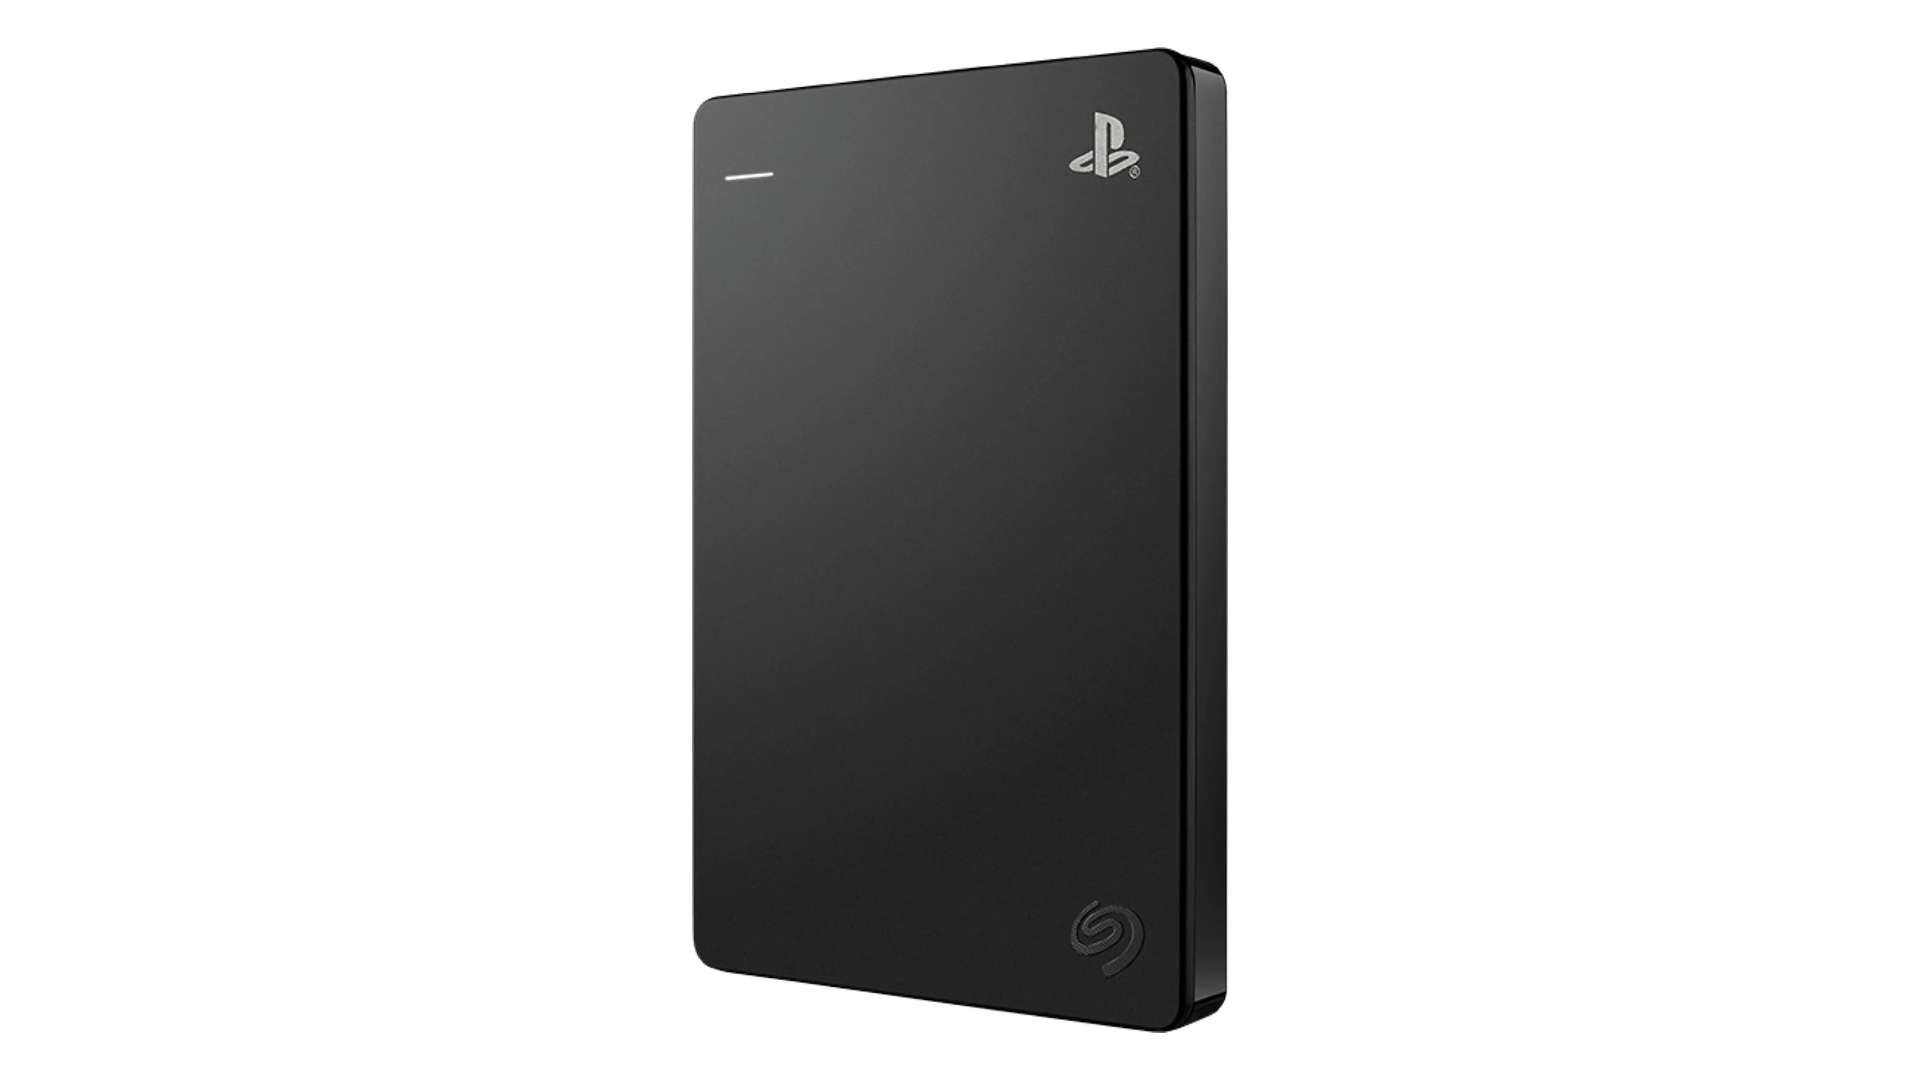 SEAGATE Disque dur externe 2 TB Game Drive PlayStation